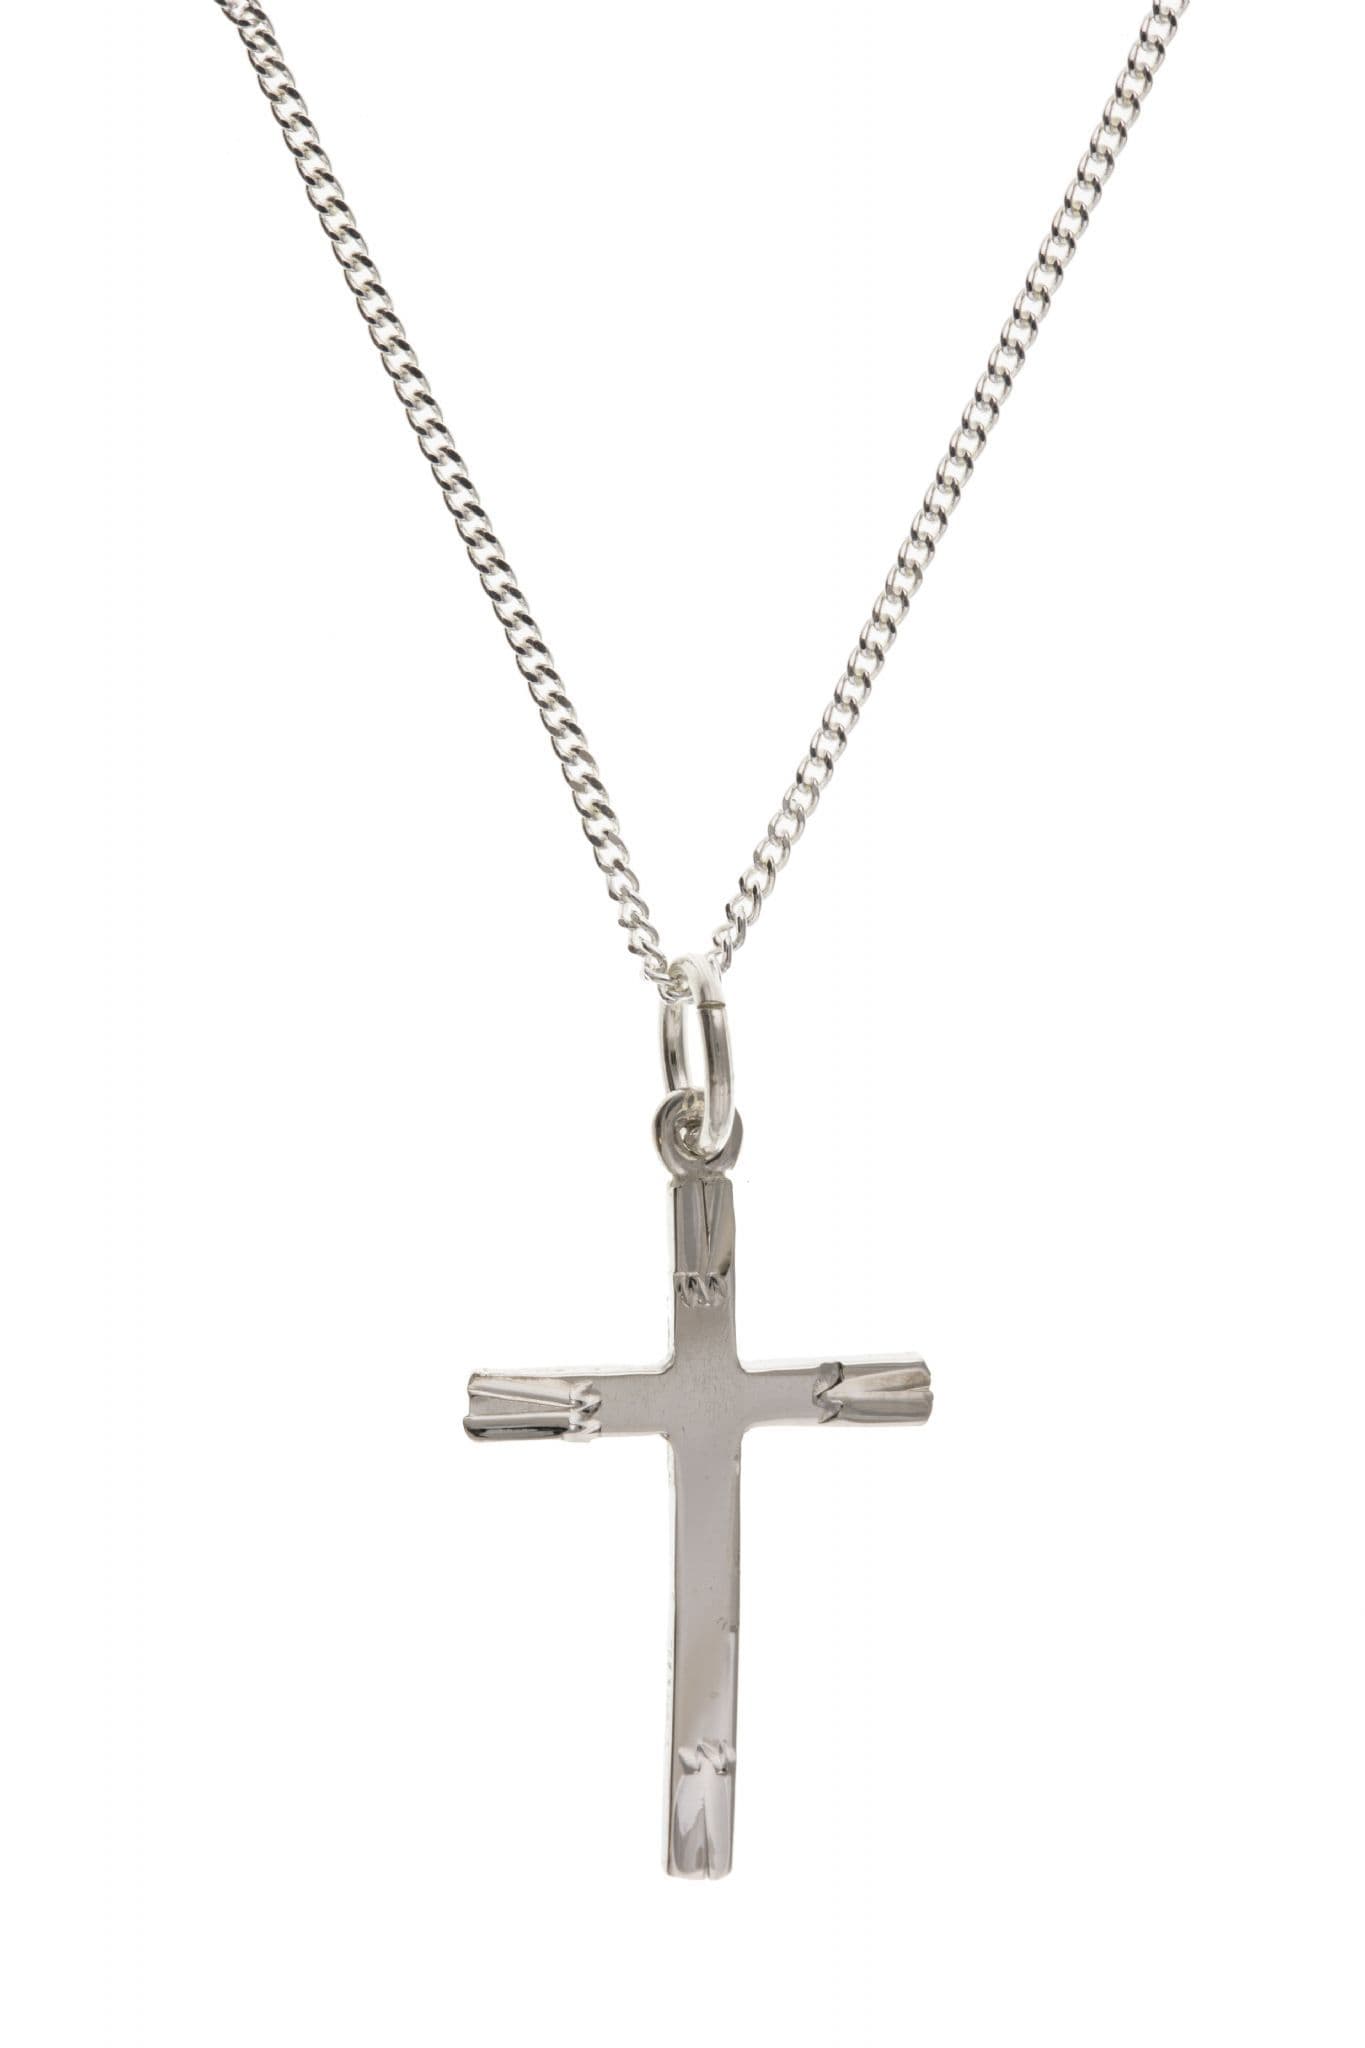 Sterling Silver Diamond Cut Cross Necklace  Chain Included  Height - 21mm  Width - 13mm  Gift Box Included  A beautiful solid sterling silver polished cross necklace, with a diamond cut zigzag design to the centre including an 18 inch sterling silver curb chain